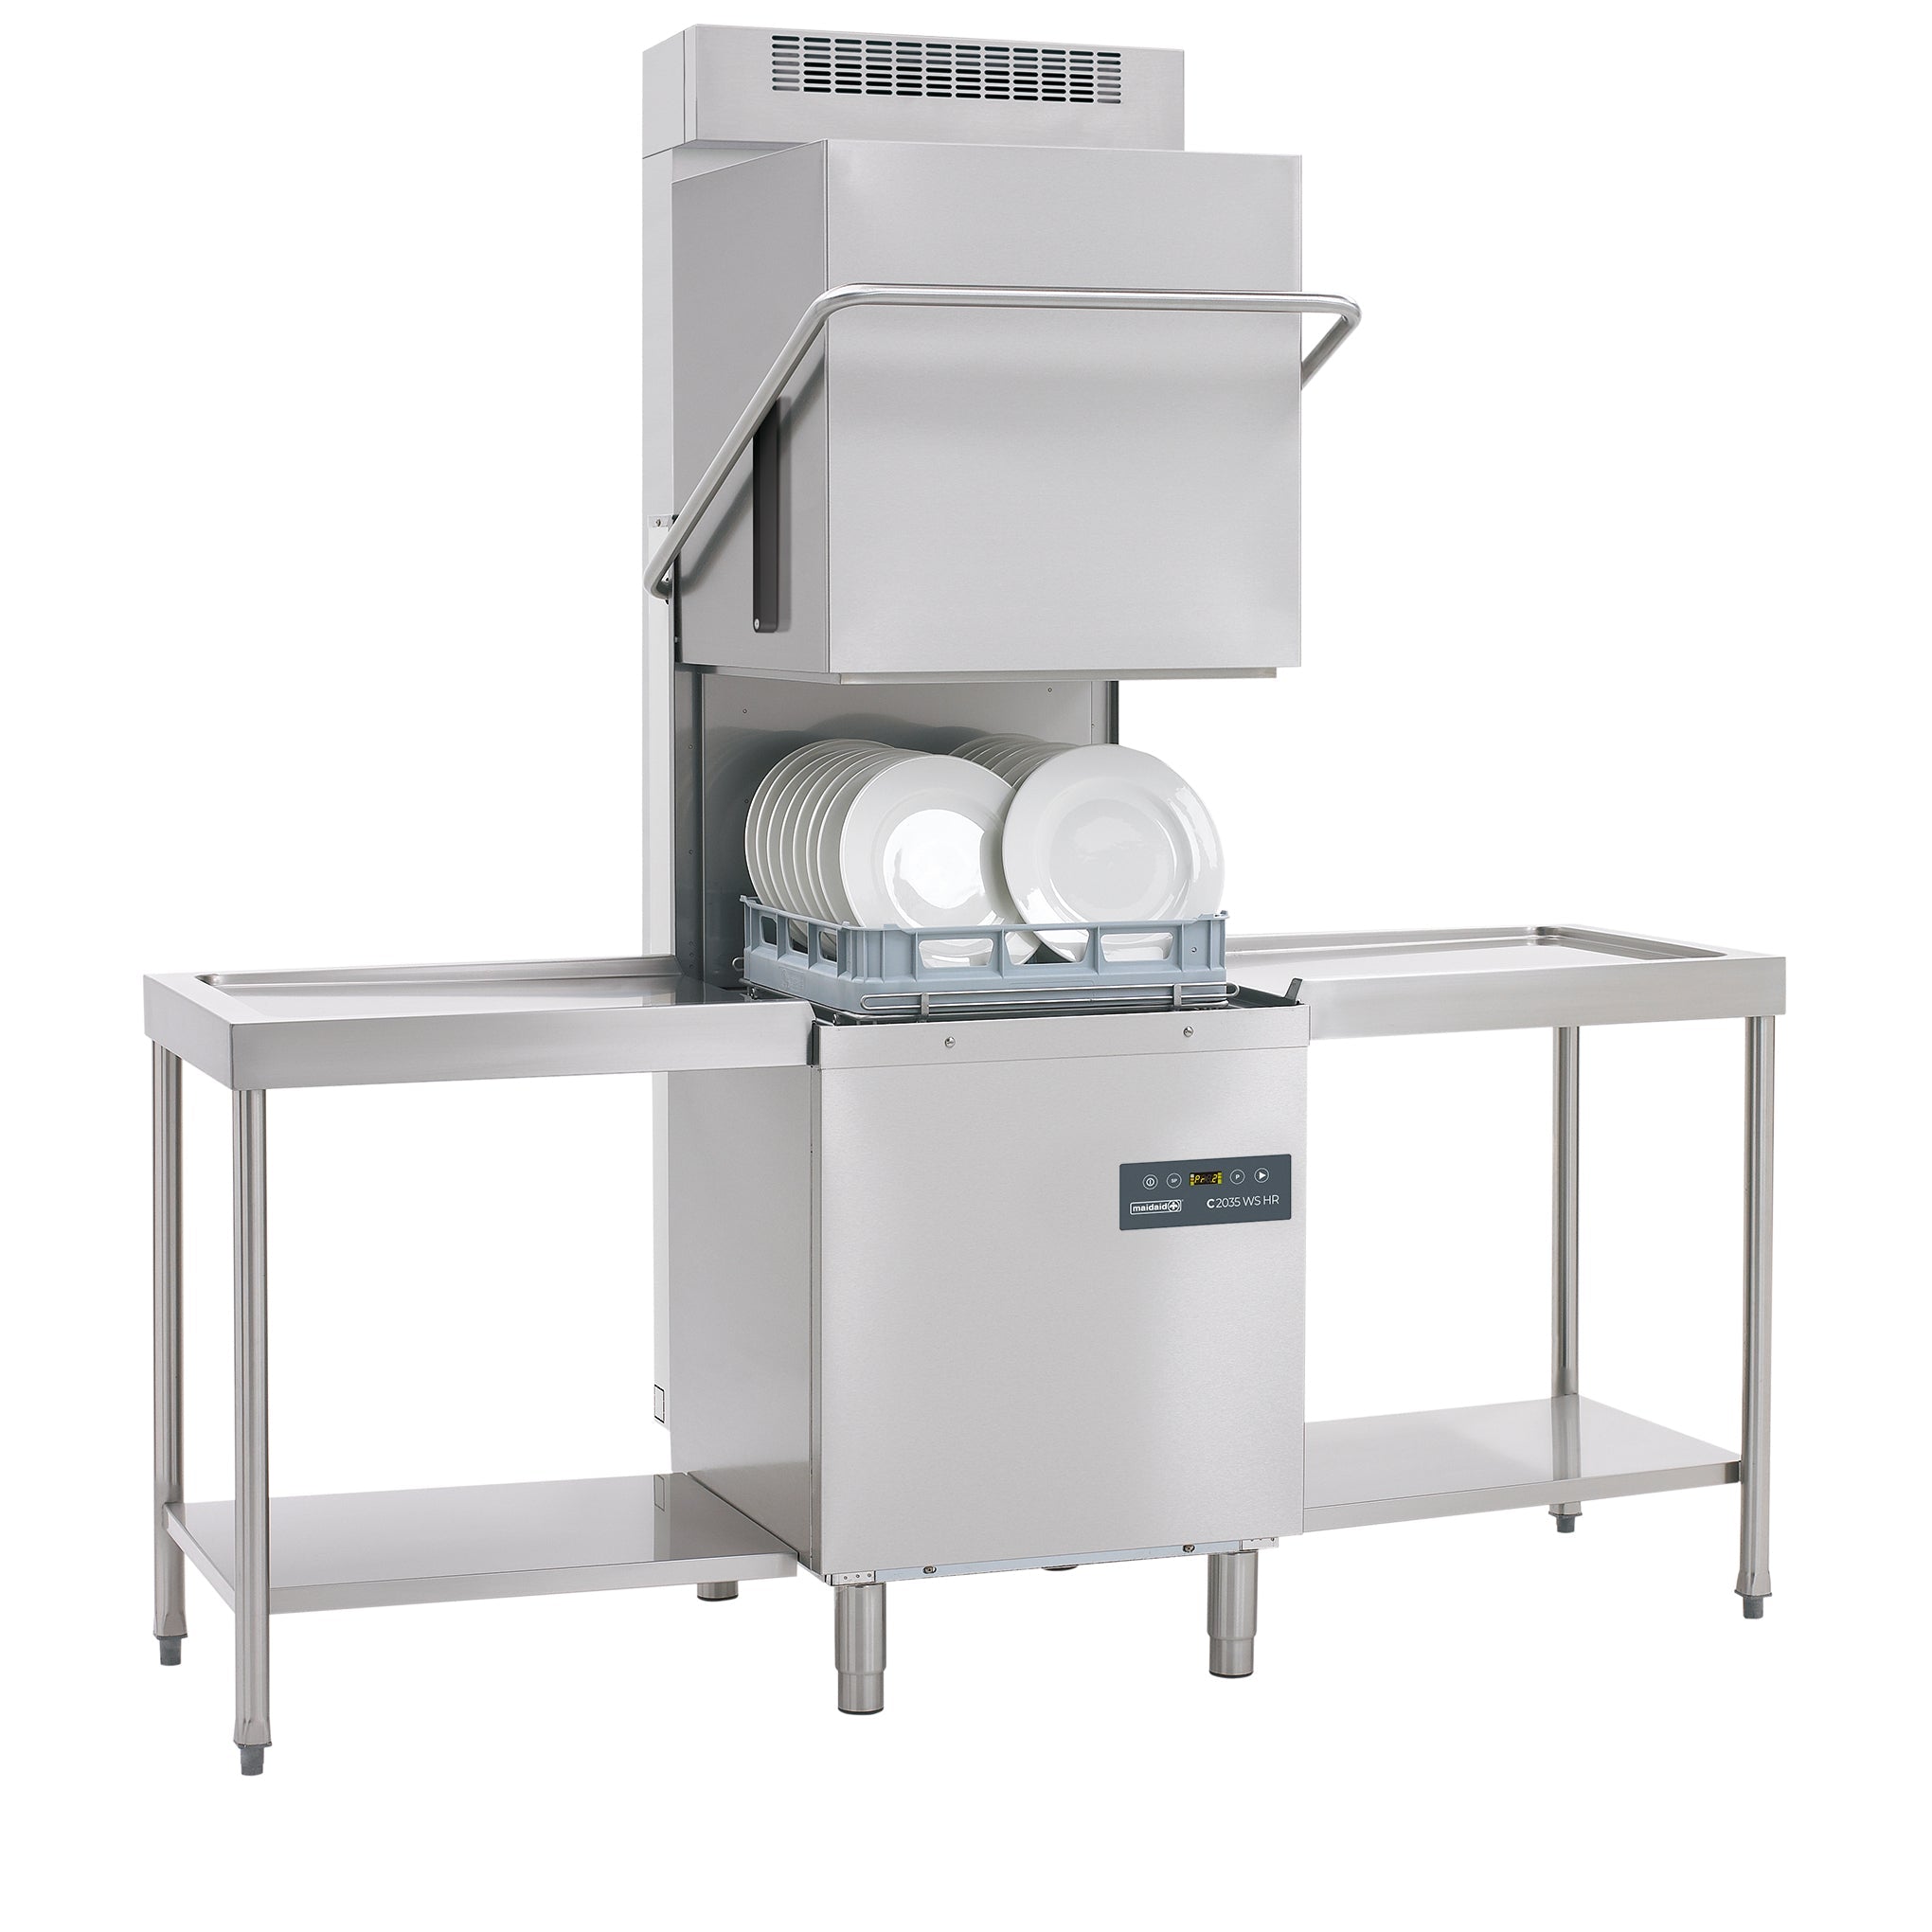 Maidaid C2035WS HR Pass Through + Heat Recovery Dishwasher JD Catering Equipment Solutions Ltd